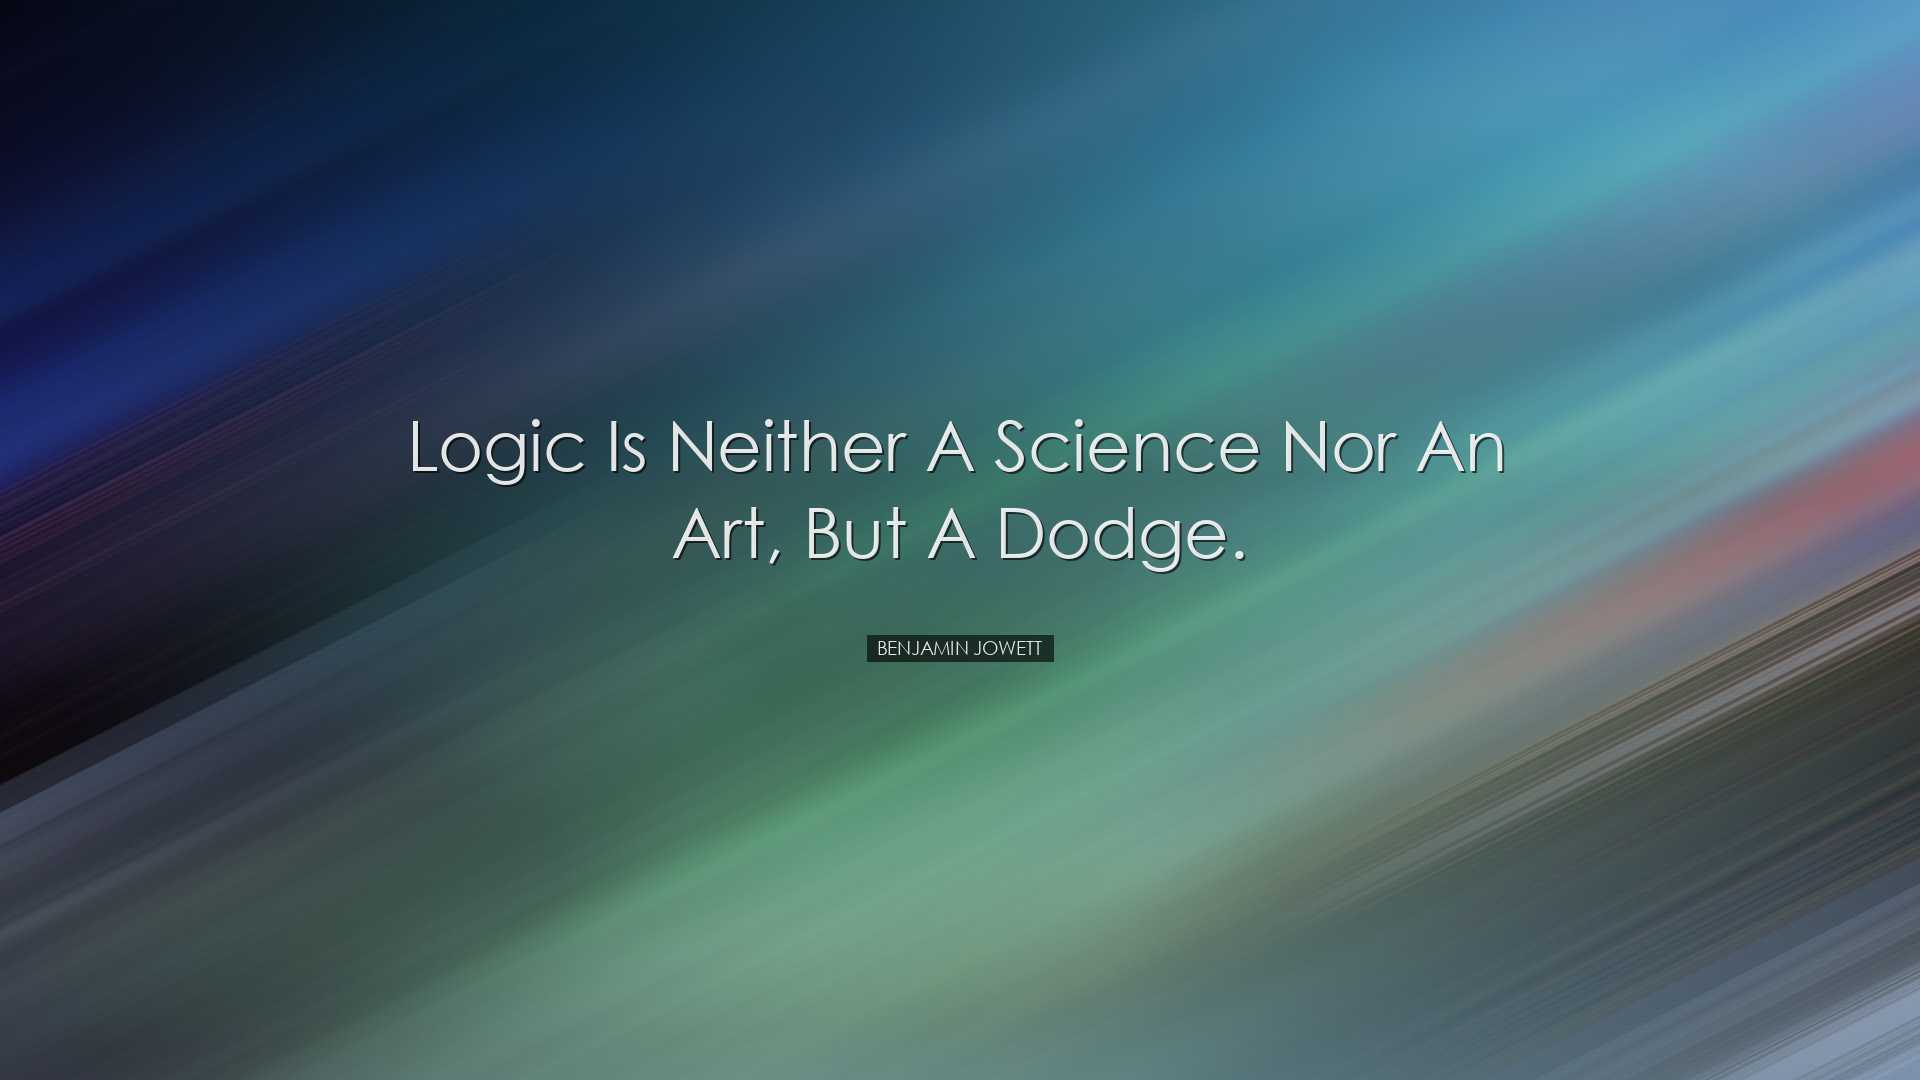 Logic is neither a science nor an art, but a dodge. - Benjamin Jow